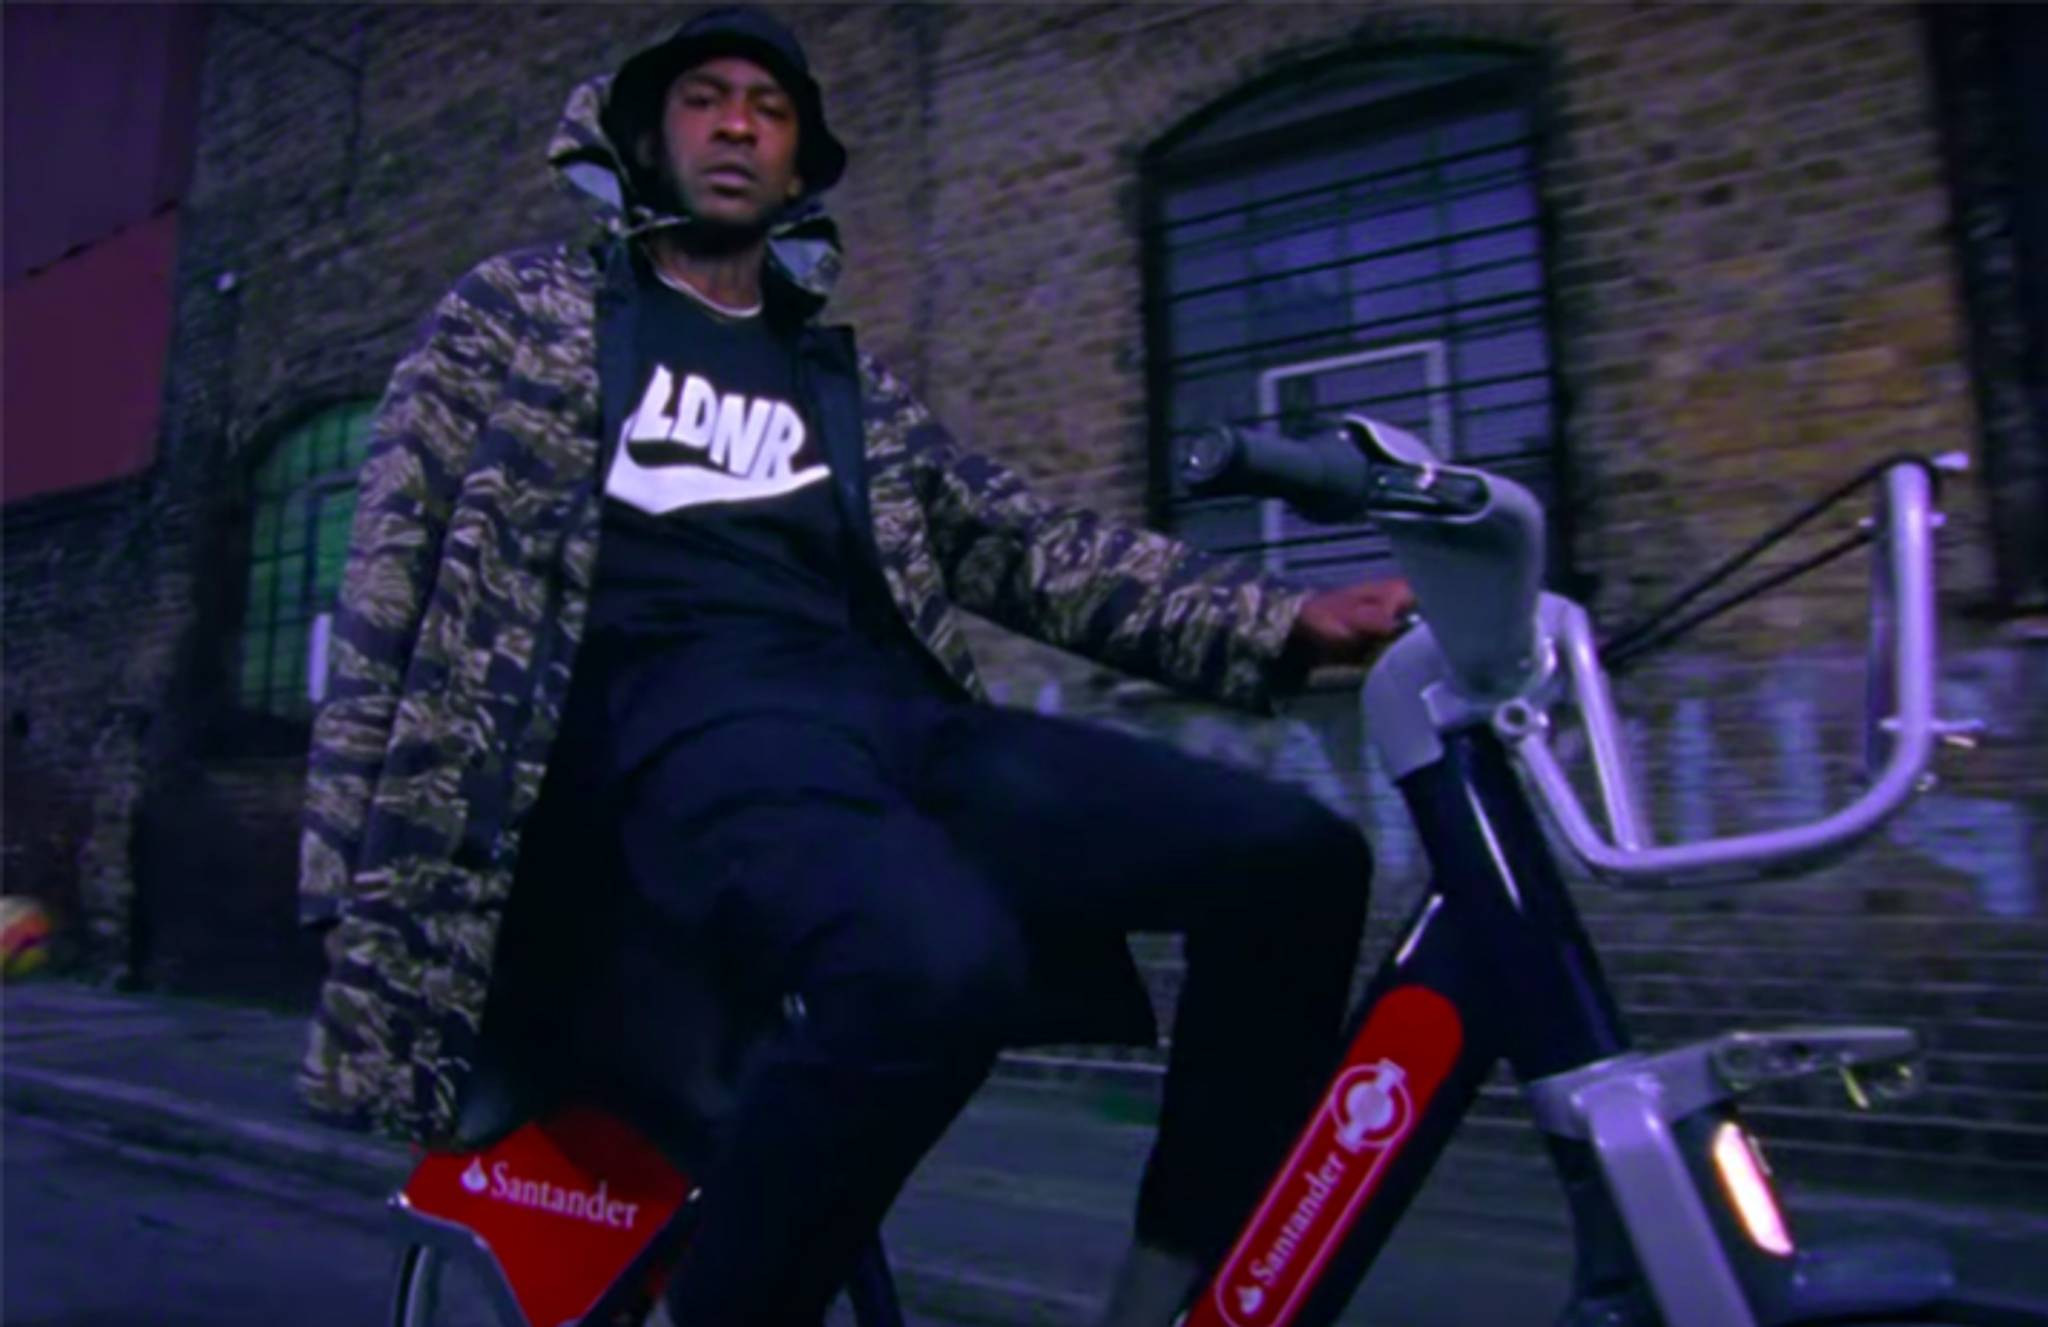 Nike captures the grit of London's sporting youth